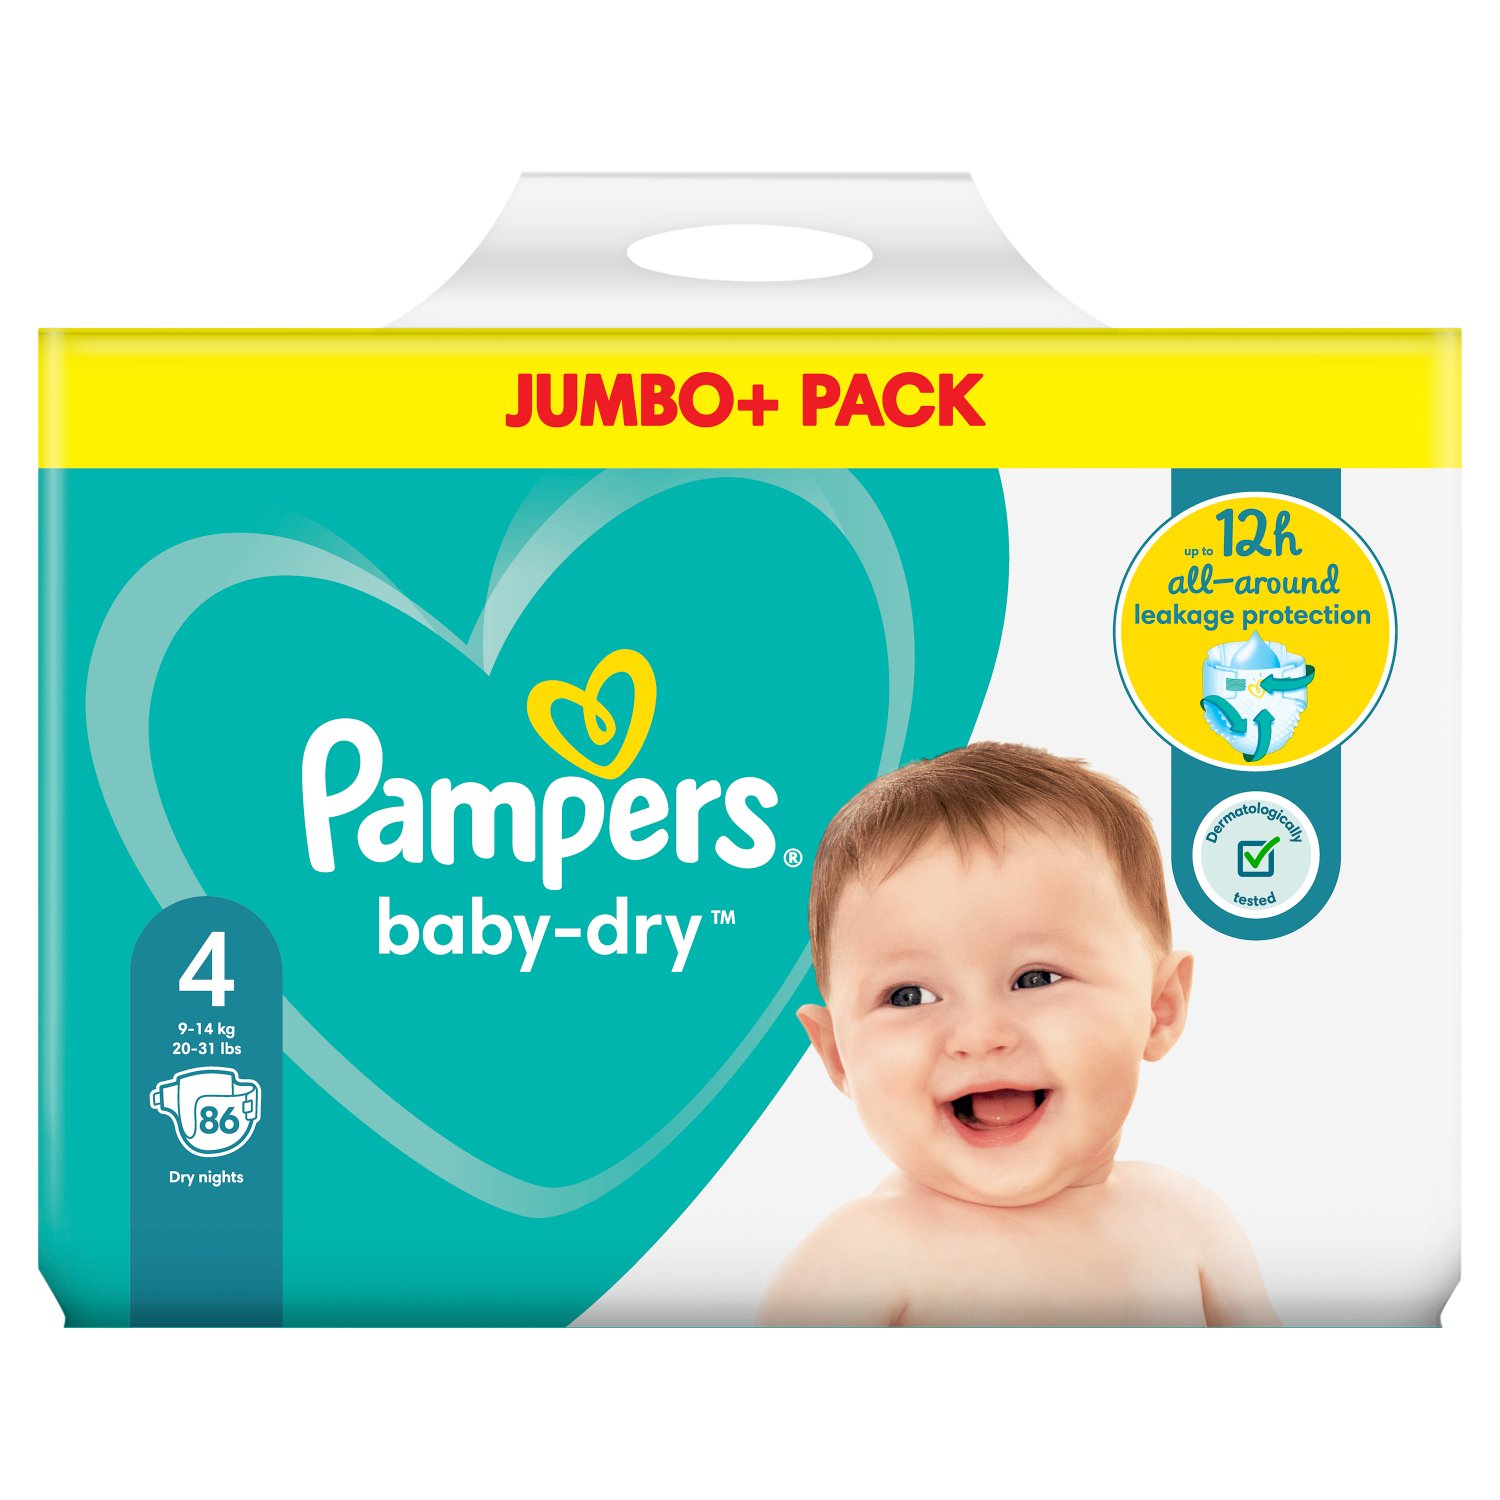 Imagine how intensely babies feel everything in their world. So imagine how uncomfortable a wet nappy must feel on their skin. That's why only Pampers Baby-Dry nappies have an extra absorbing layer to absorb wetness quickly for up to 12 hours of dry and protected skin. To help keep your baby dry and comfortable all night and all day. Just like you, we put your baby’s safety first: Pampers Baby-Dry nappies are dermatologically tested and approved by the dermatologists of the British Skin Foundation. They are tested and certified according to Standard 100 by Oekotex. Want to know more about the components we use? Visit pampers.co.uk. Use with Pampers baby wipes.